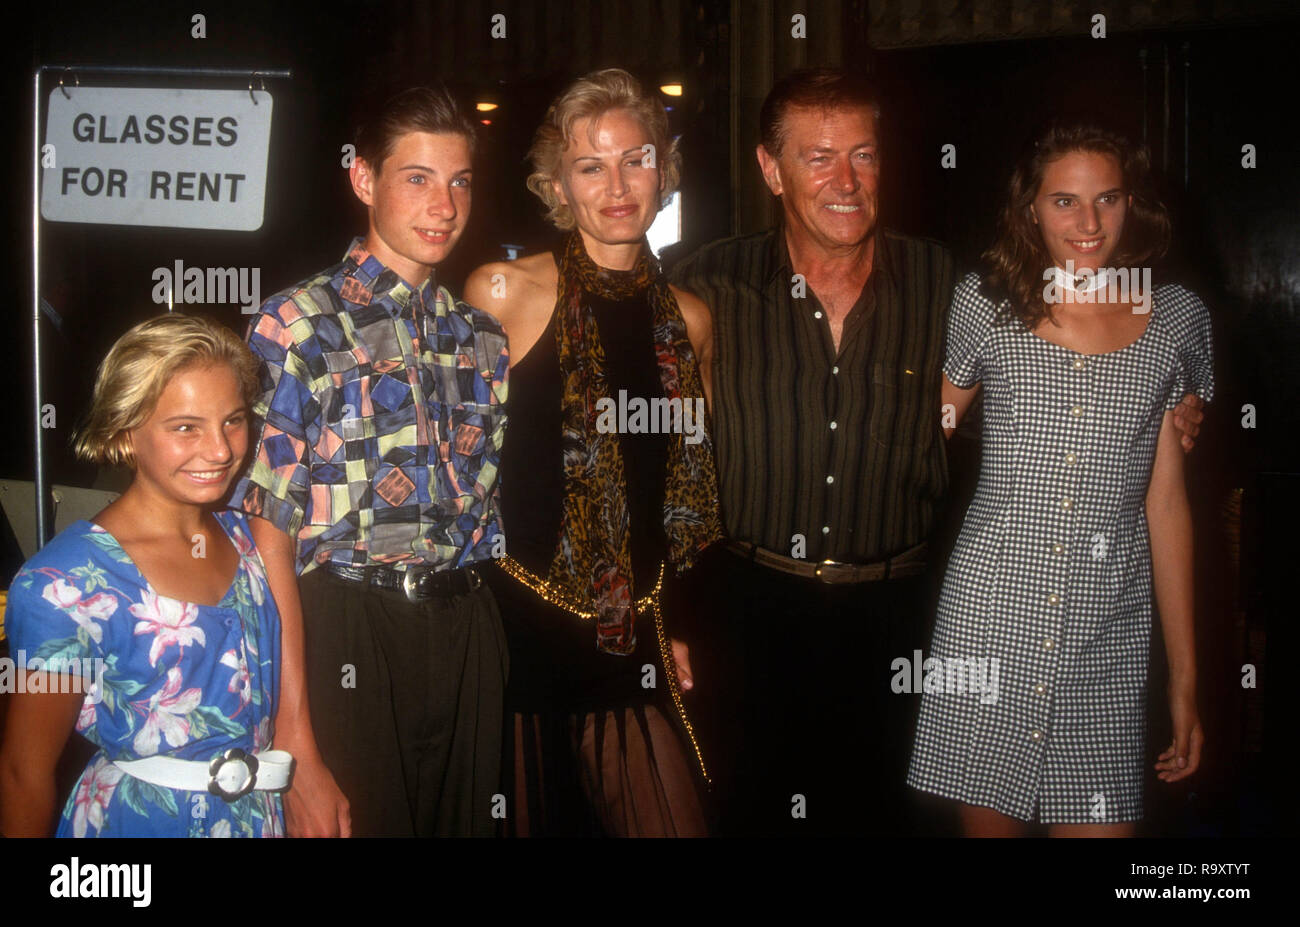 LOS ANGELES, CA - JUNE 27: Actor Quinn K. Redeker, Lita Olsen and family attends event on June 27, 1993 in Los Angeles, California. Photo by Barry King/Alamy Stock Photo Stock Photo